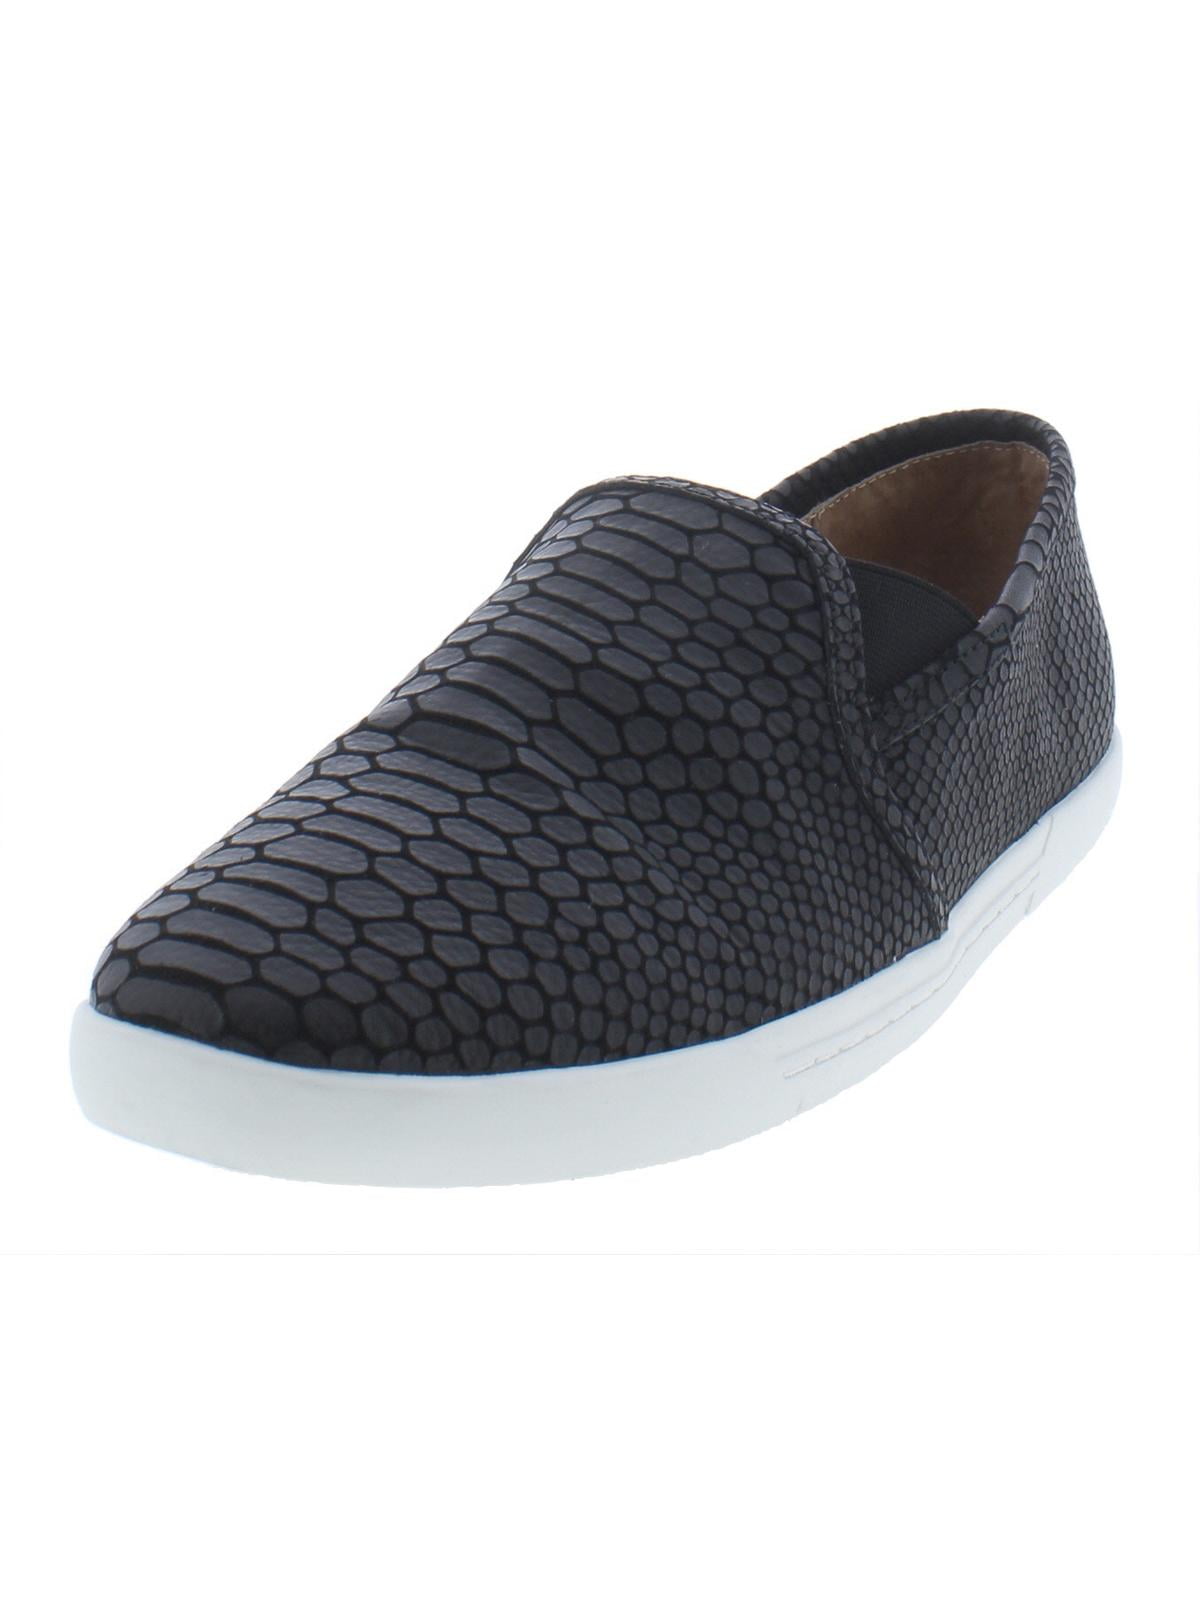 joie slip on shoes